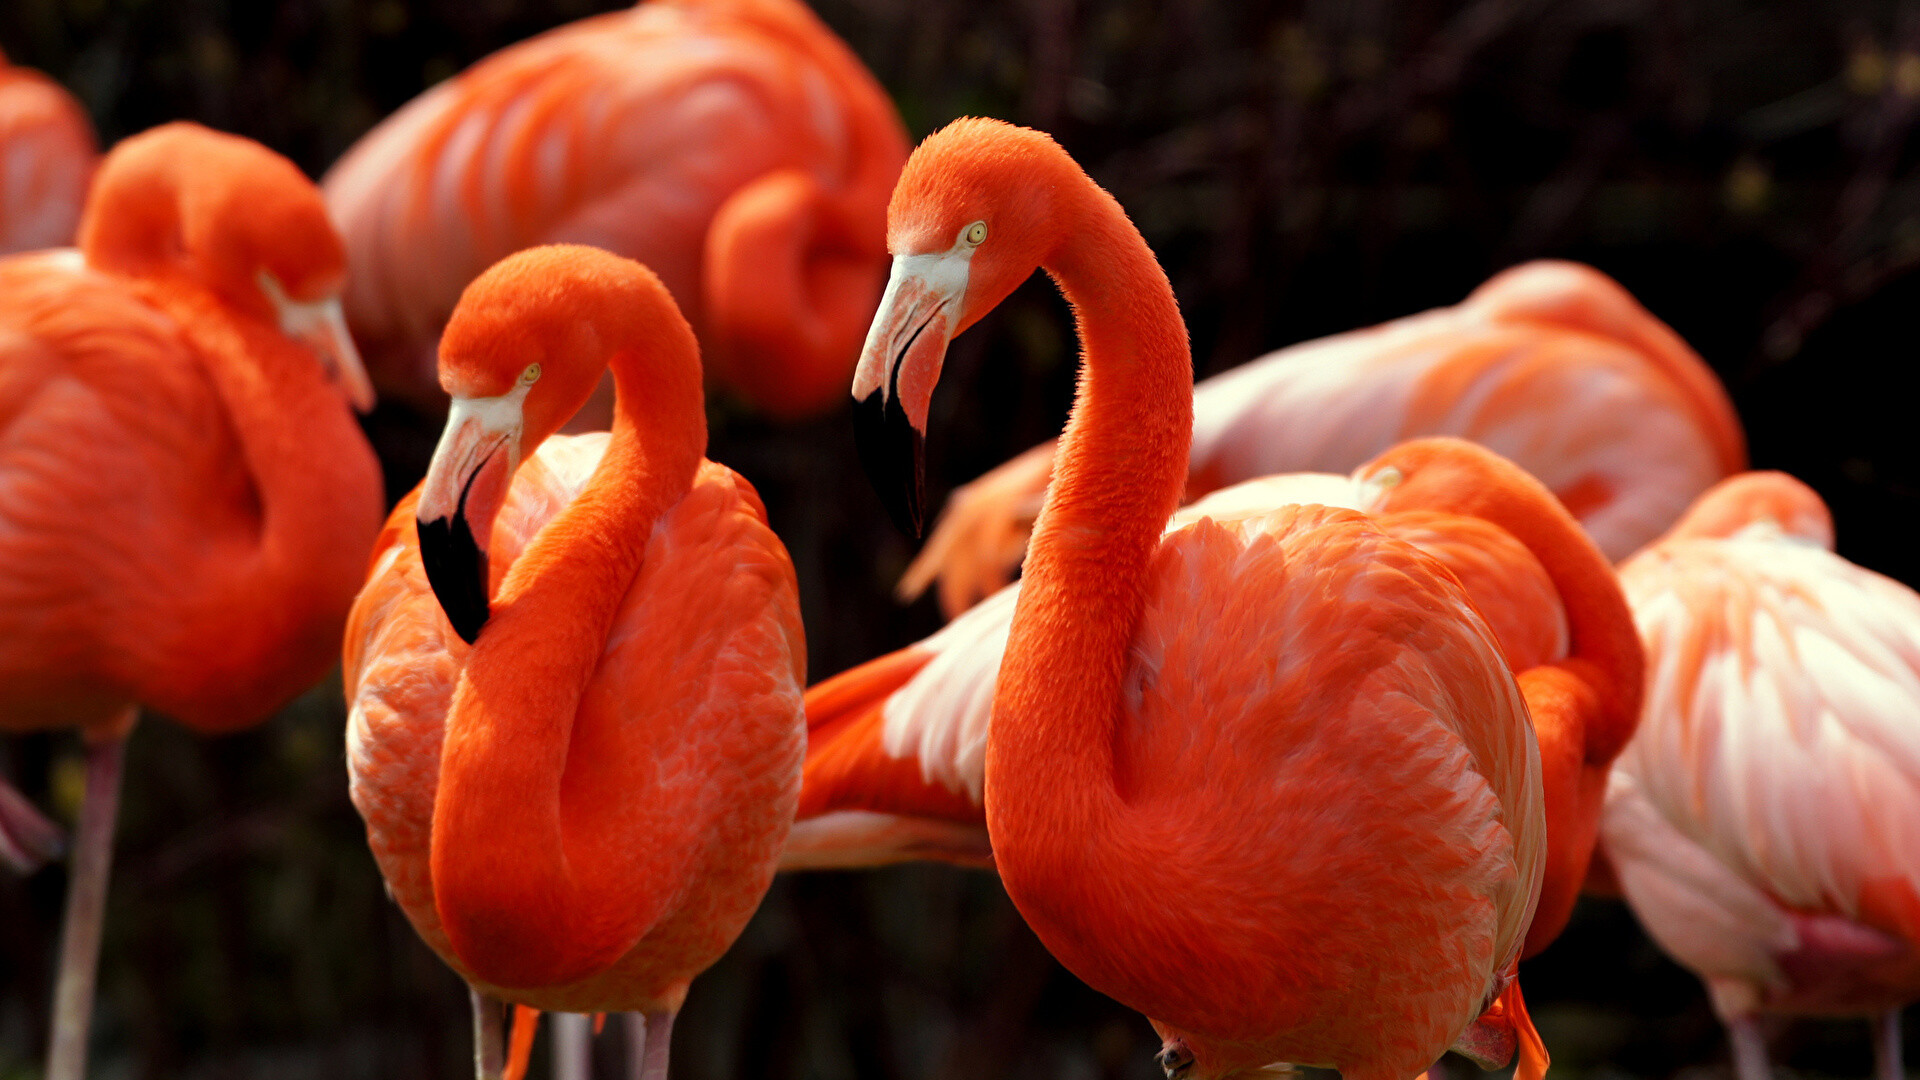 Flamingo: Wading birds with a long neck and long legs. 1920x1080 Full HD Wallpaper.